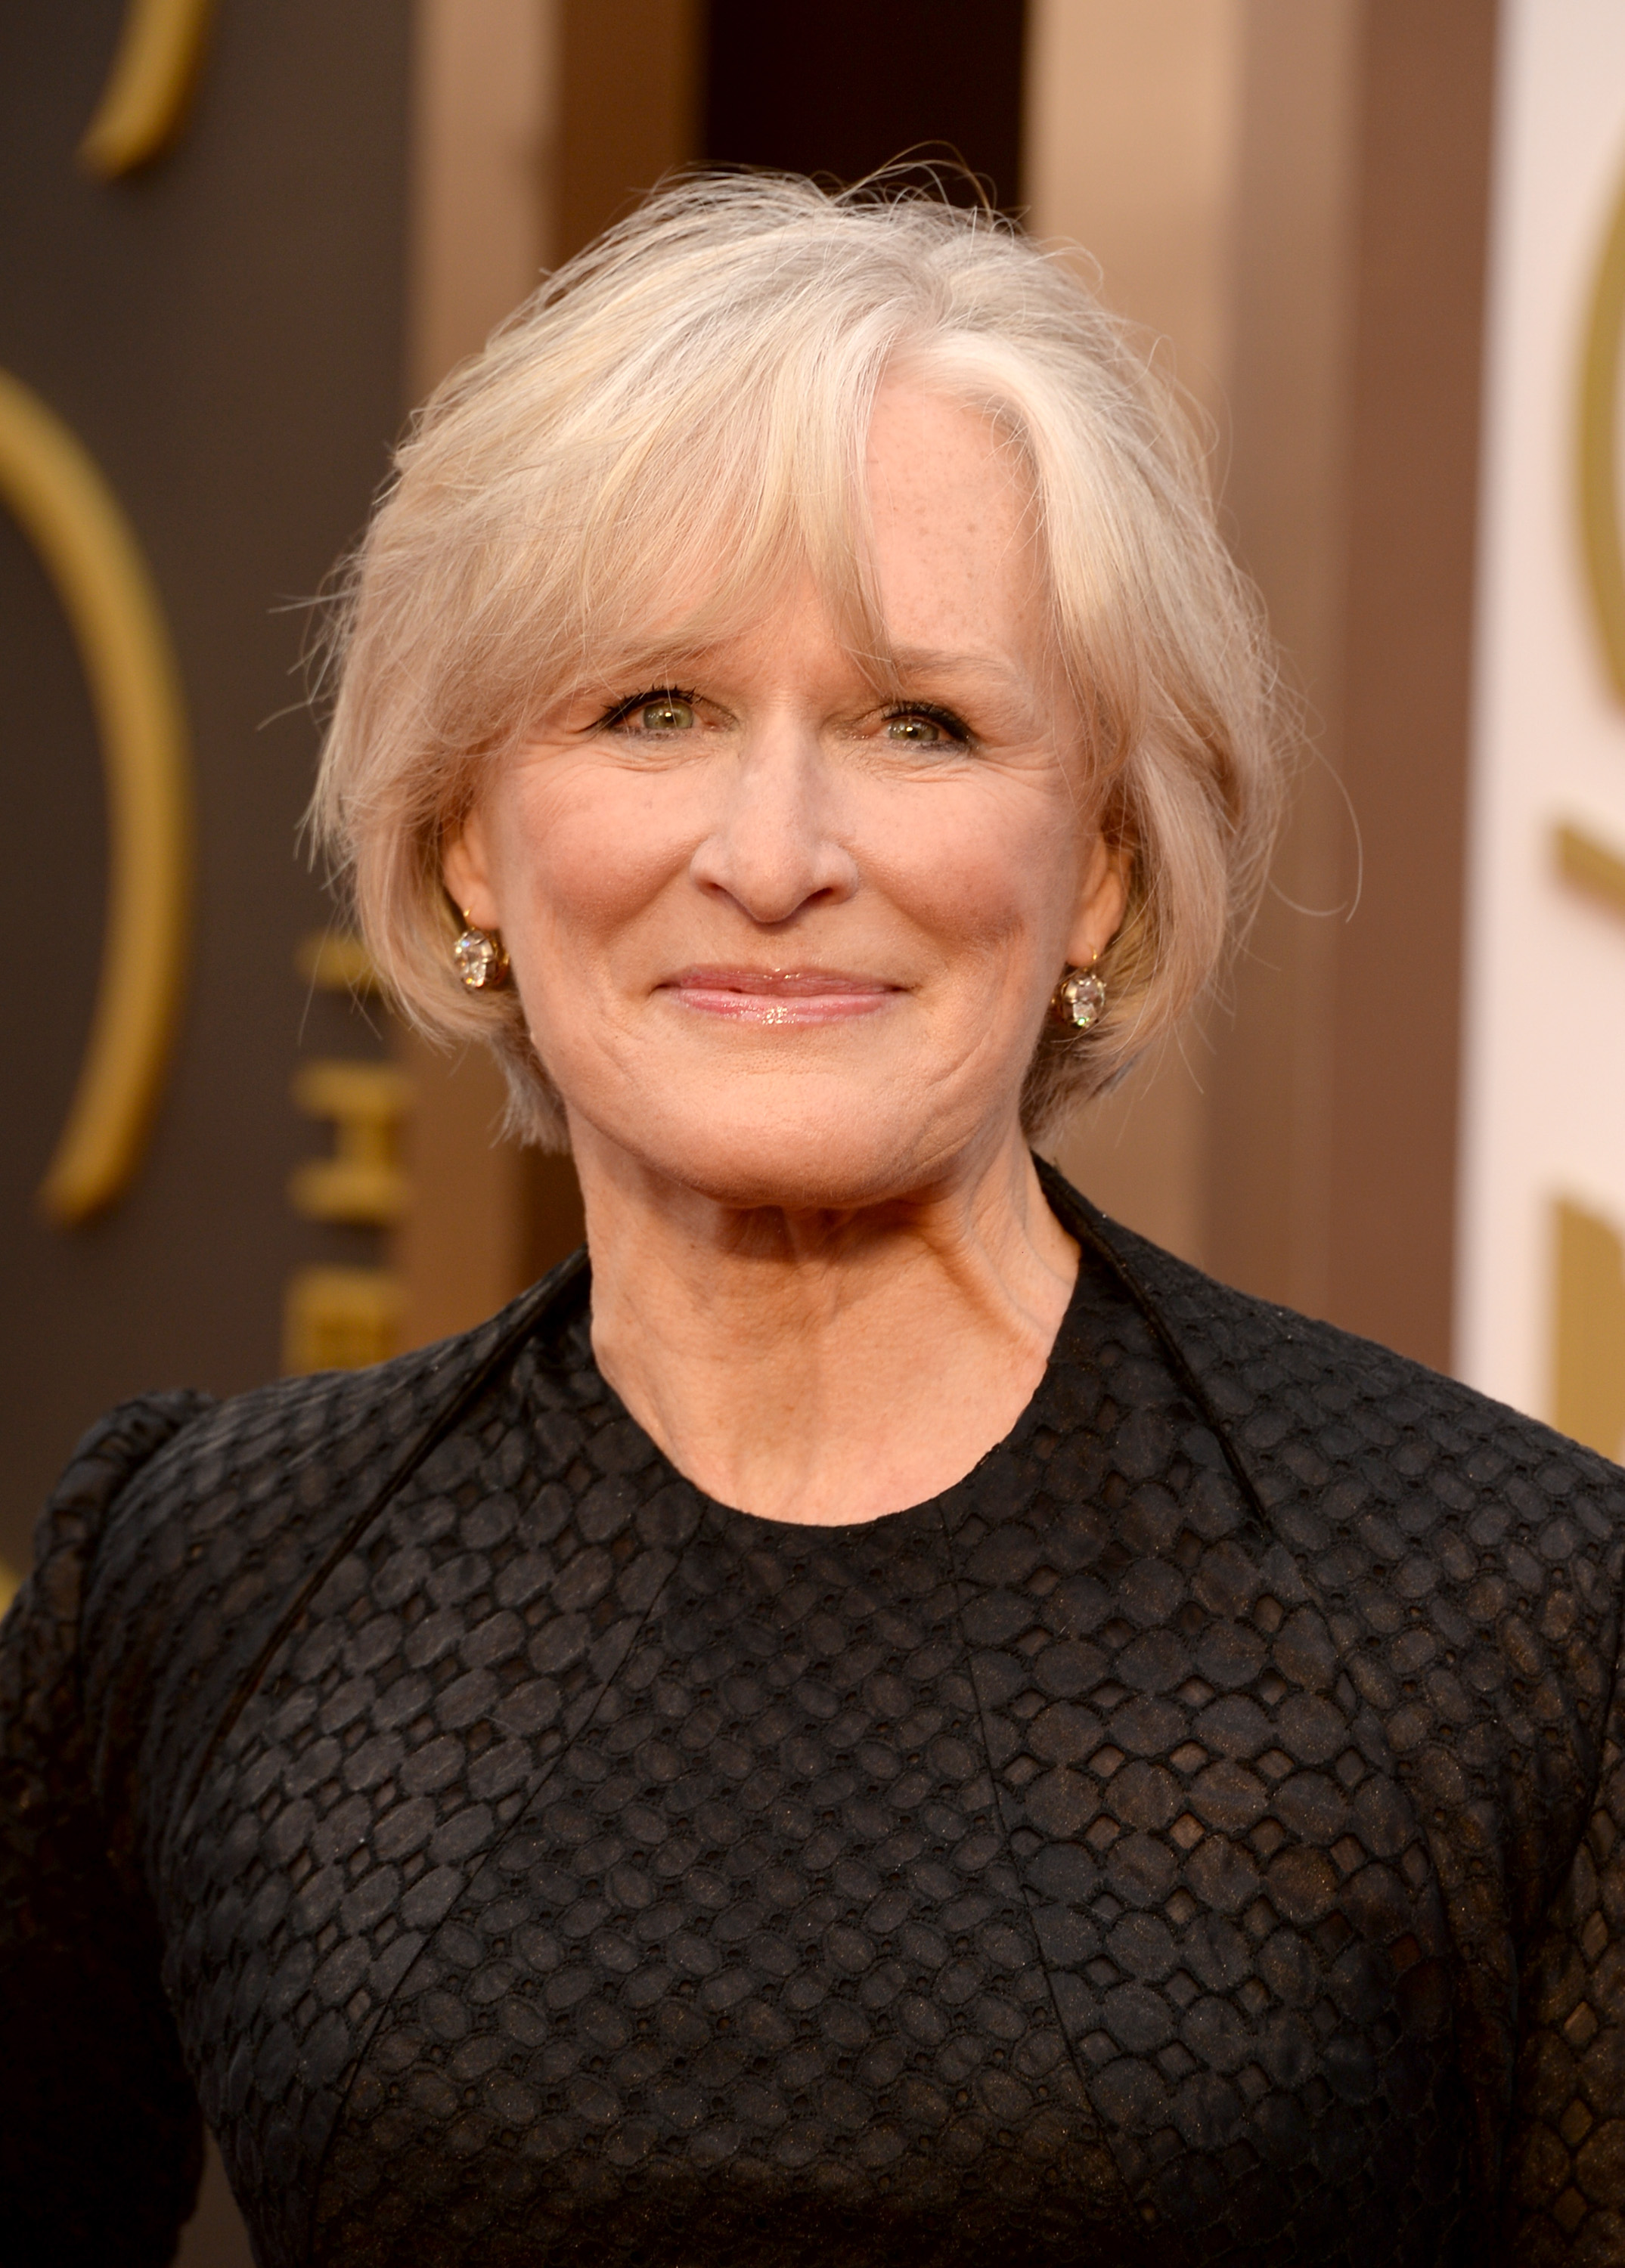 Glenn Close during the Oscars at Hollywood & Highland Center on March 2, 2014, in Hollywood, California. | Source: Getty Images